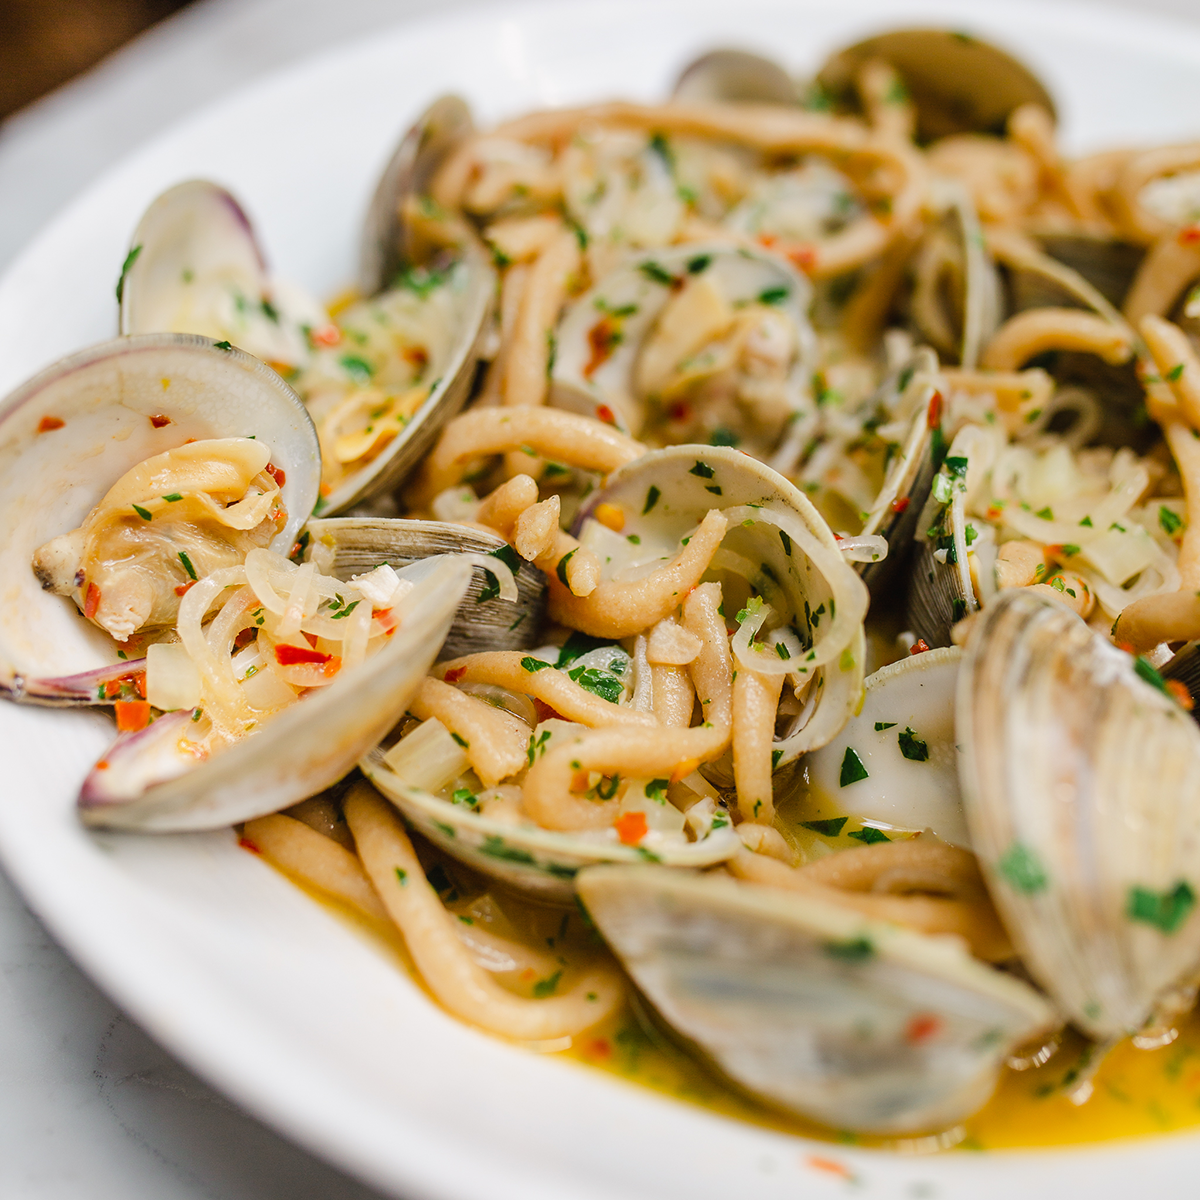 Hand Rolled Pici Pasta with Clams in White Wine Sauce